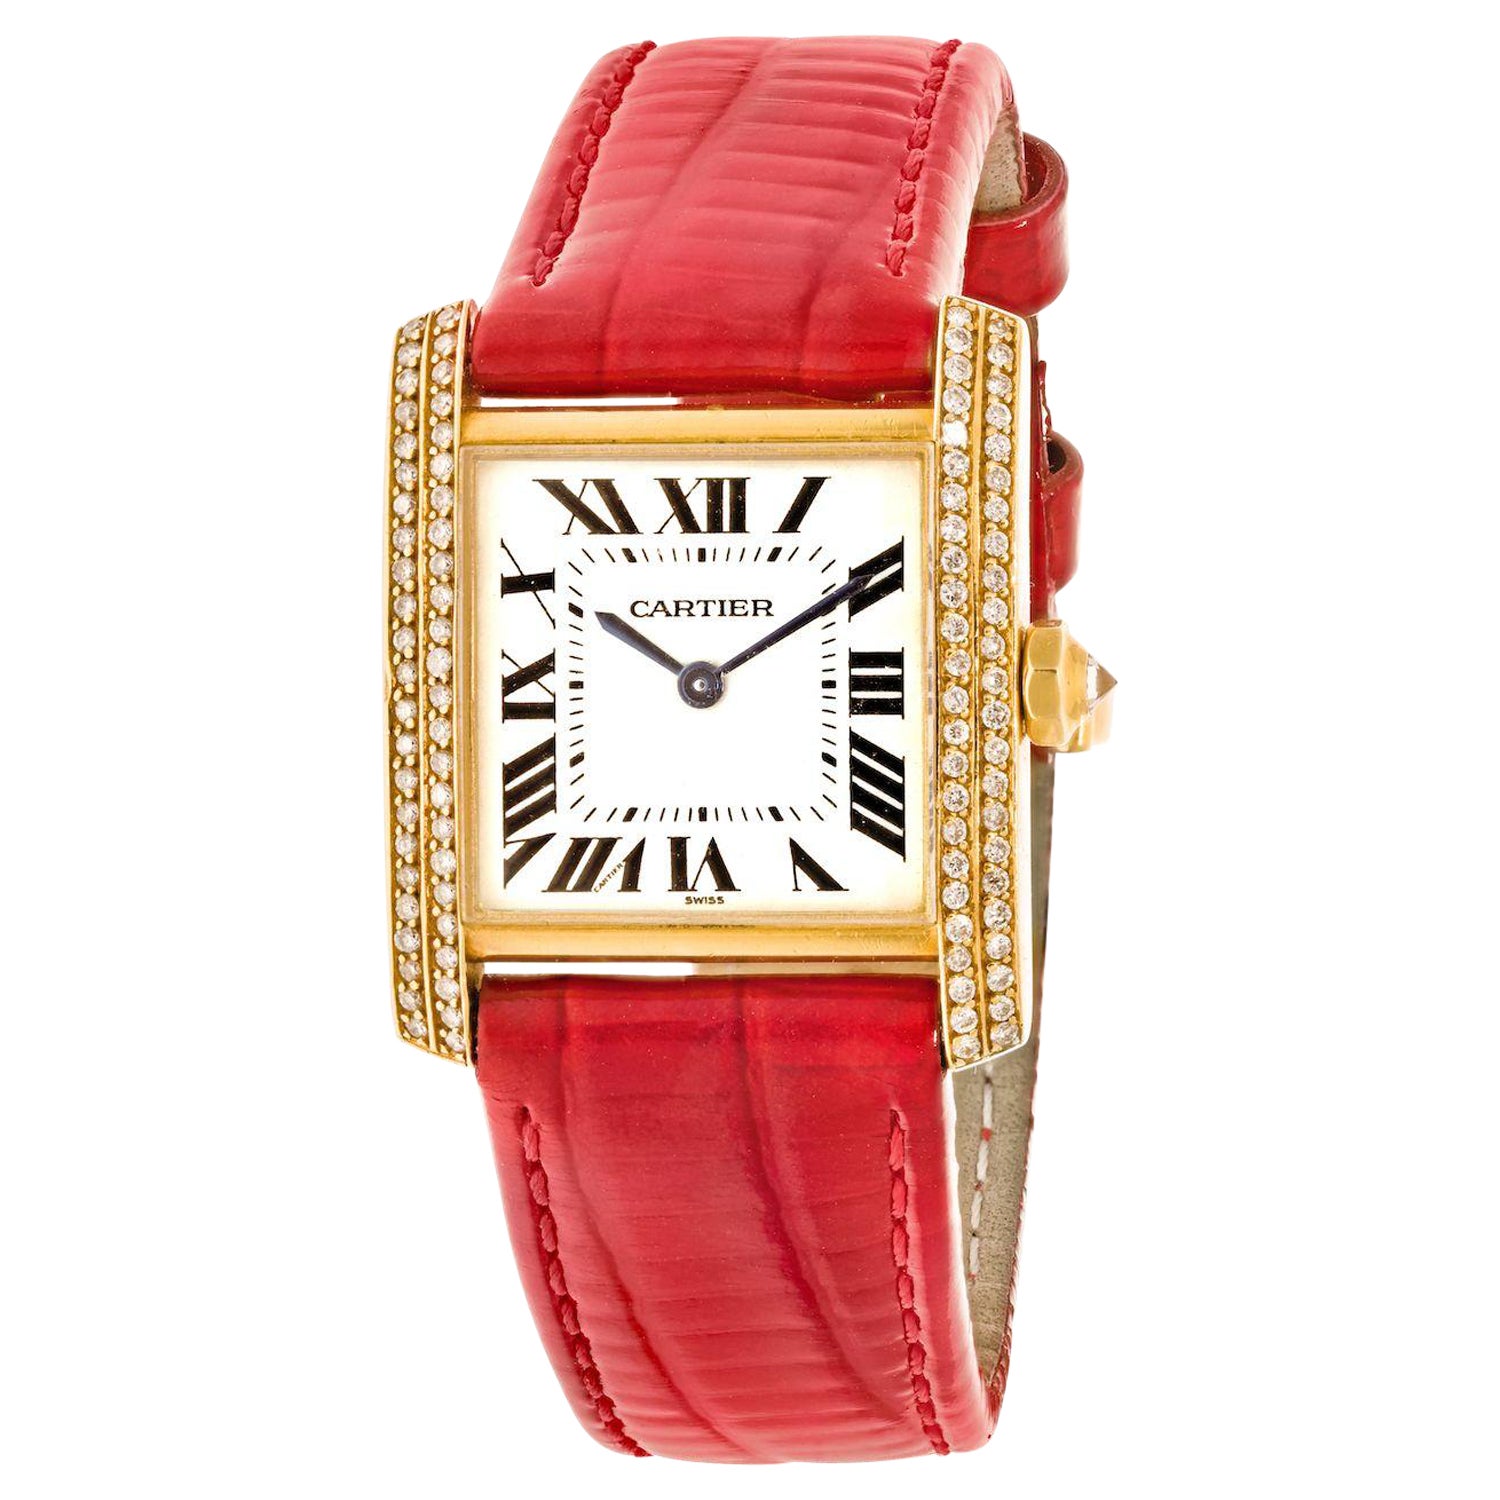 Cartier 18K Yellow Gold Tank Francaise 25, Ref 1821 Ladies Diamond Watch For Sale